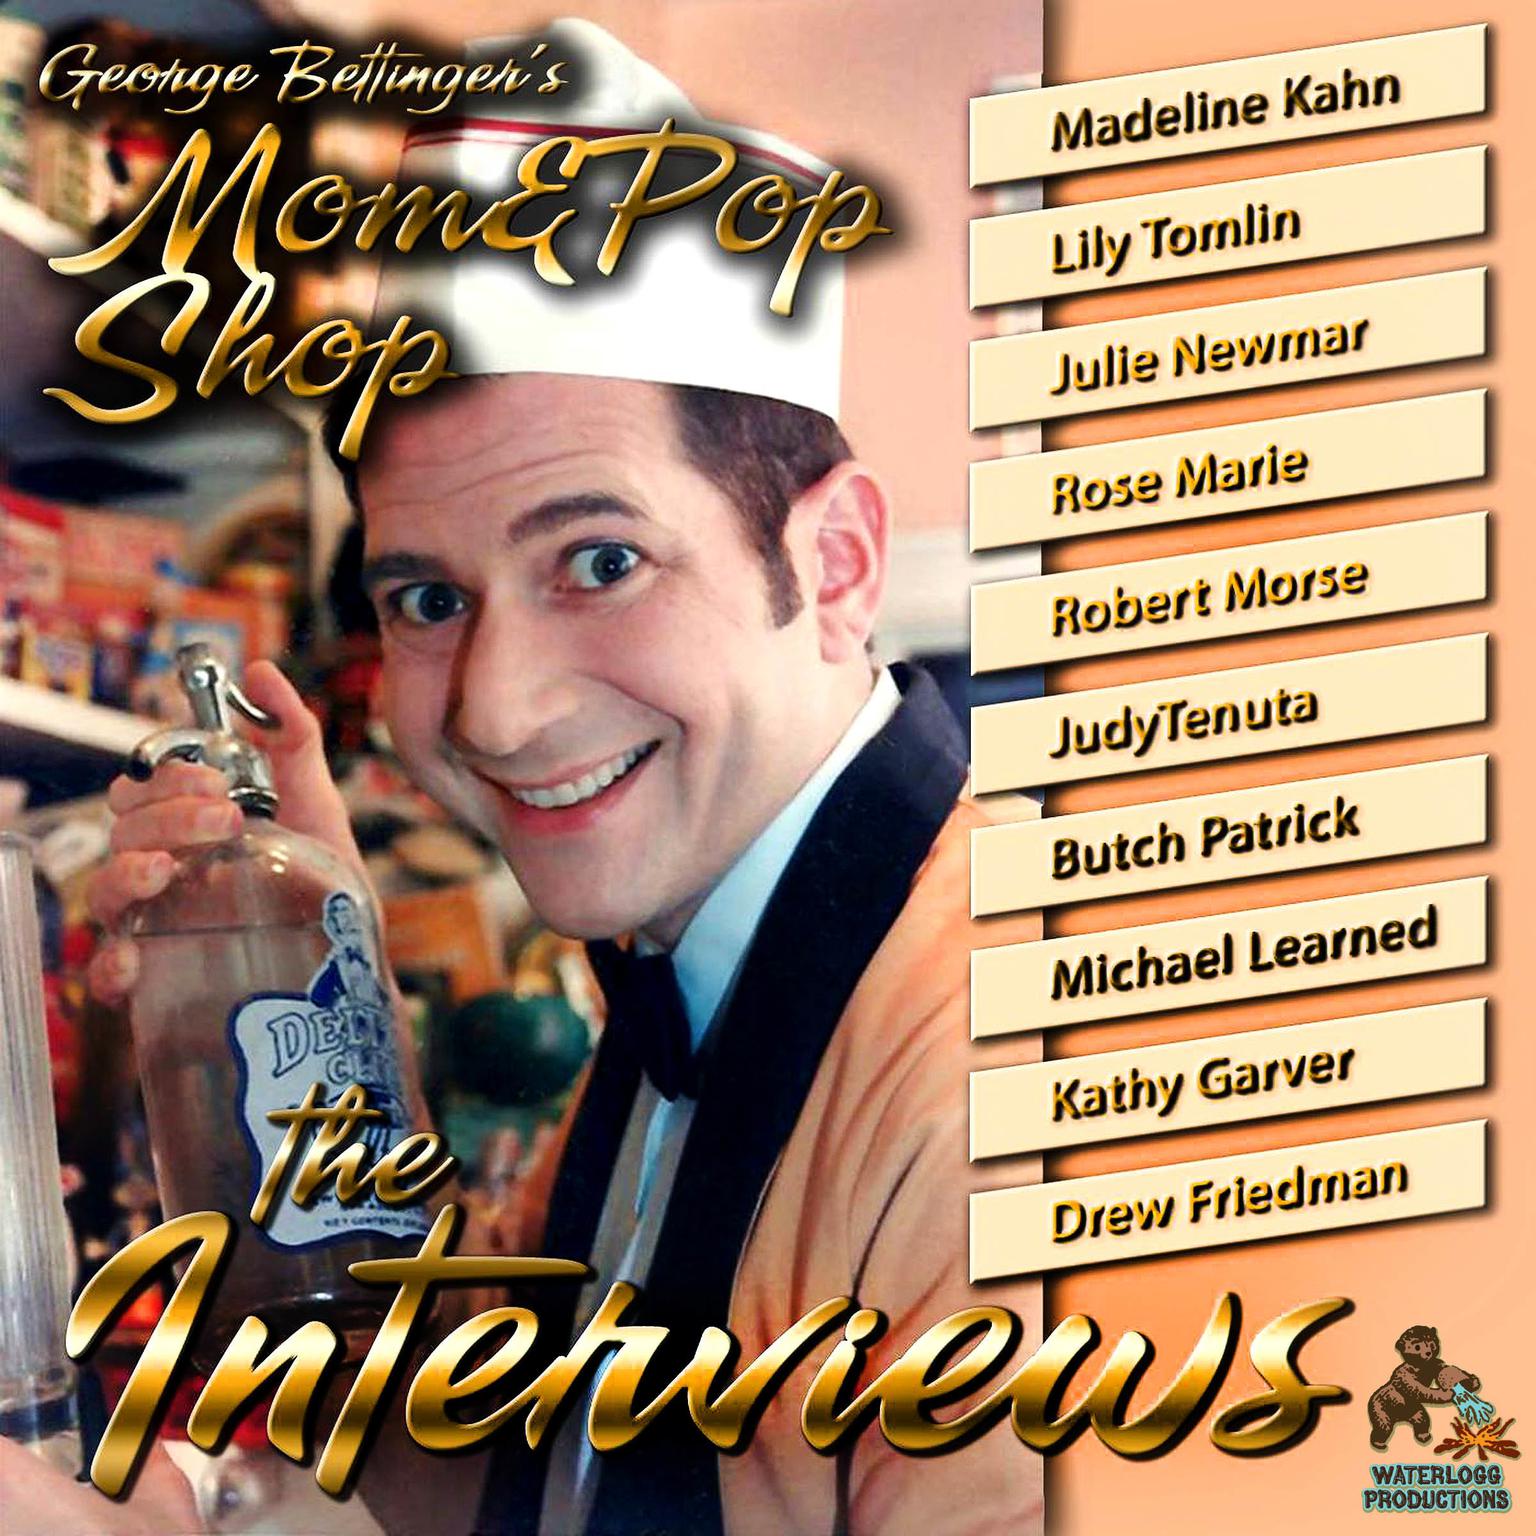 George Bettinger’s Mom & Pop Shop: The Interviews Audiobook, by George Bettinger